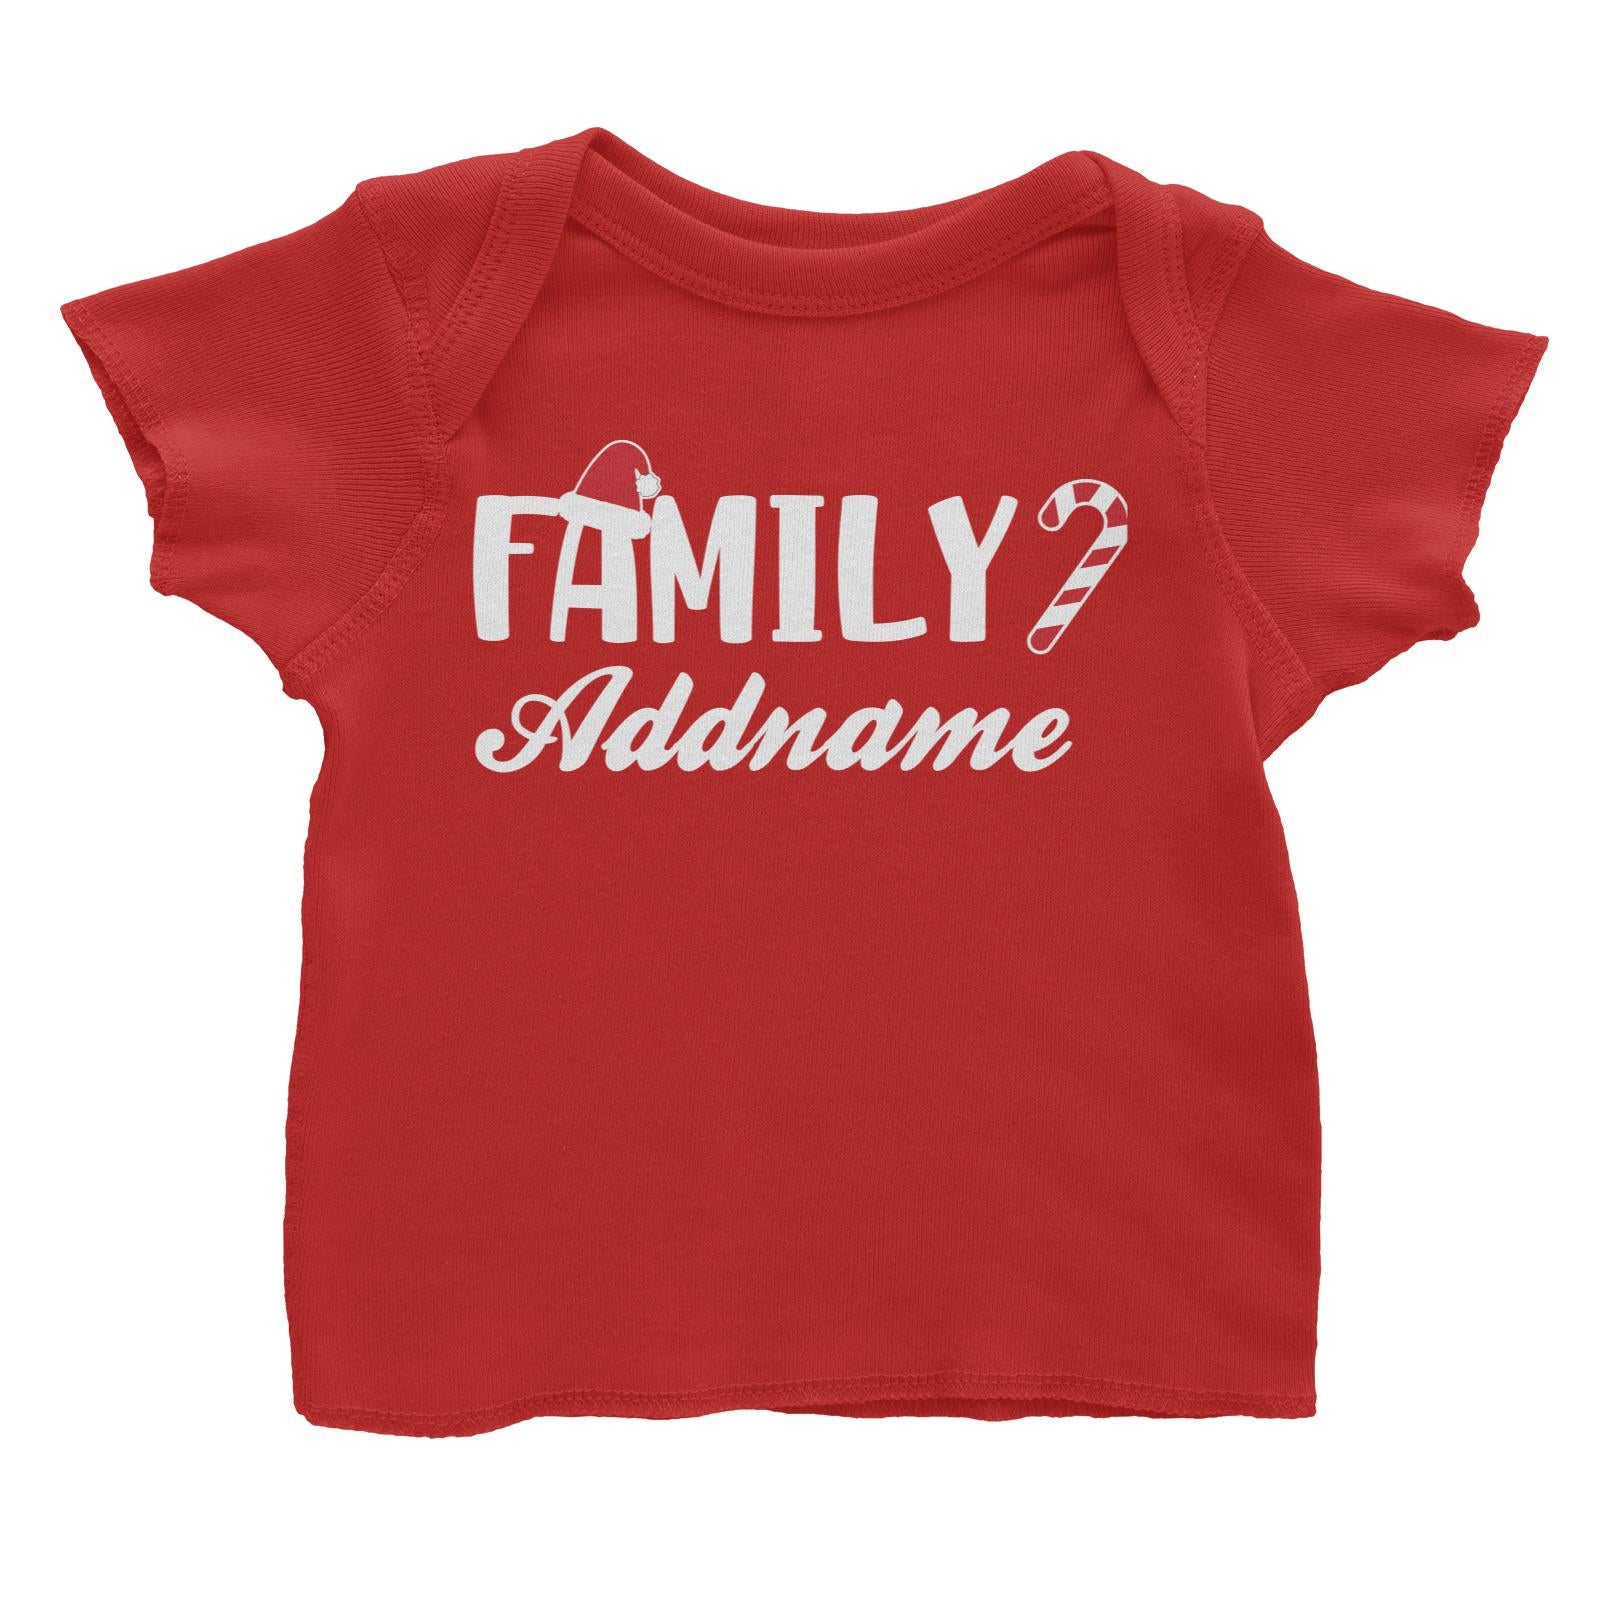 Christmas Series Family Addname with Santa Hat and Candy Cane Baby T-Shirt